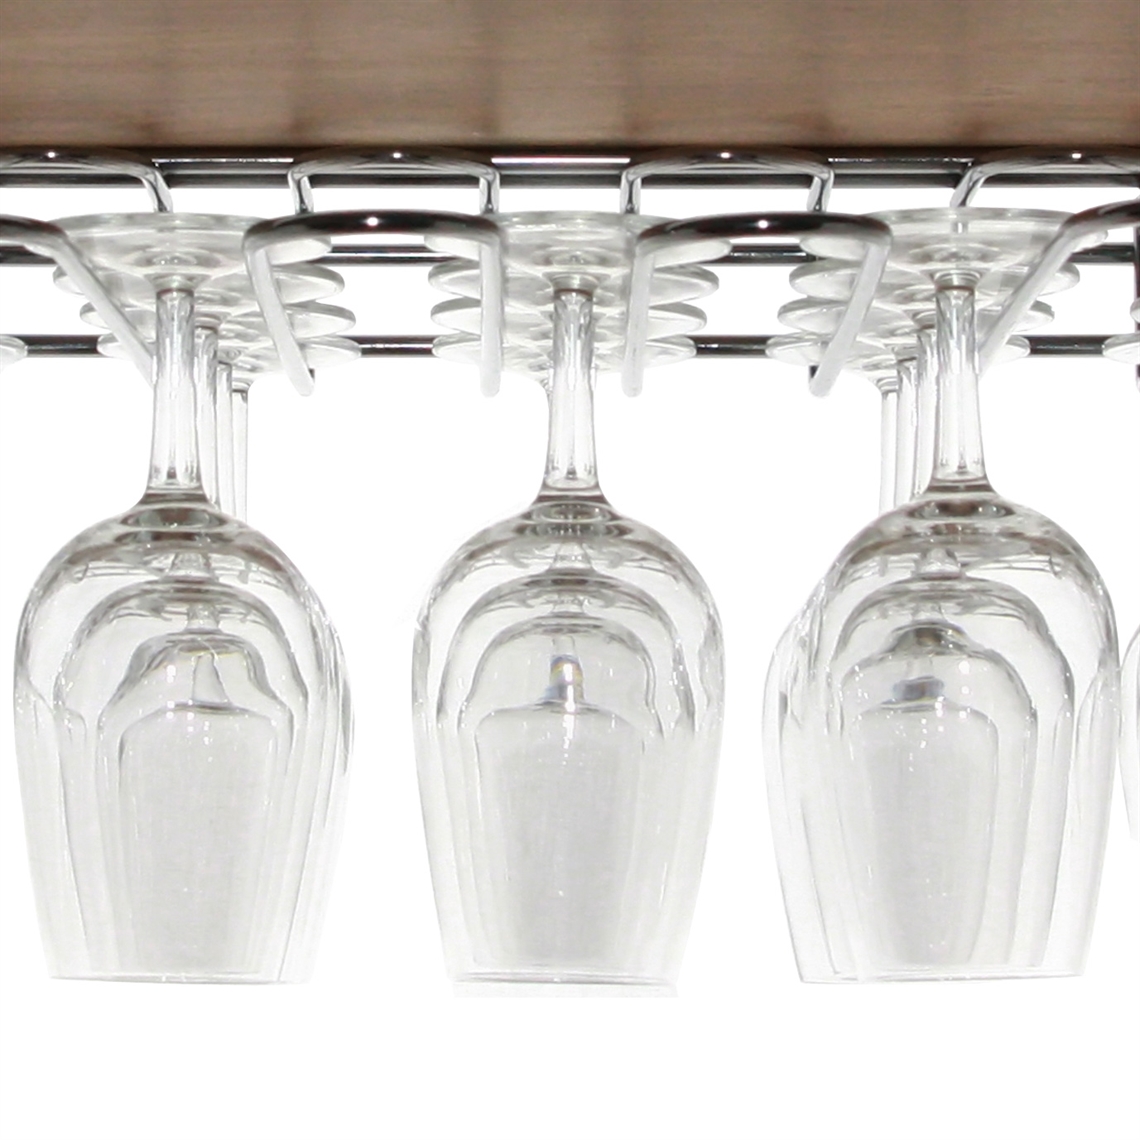 View more bottle coolers from our Wine Glass Hanging Racks range